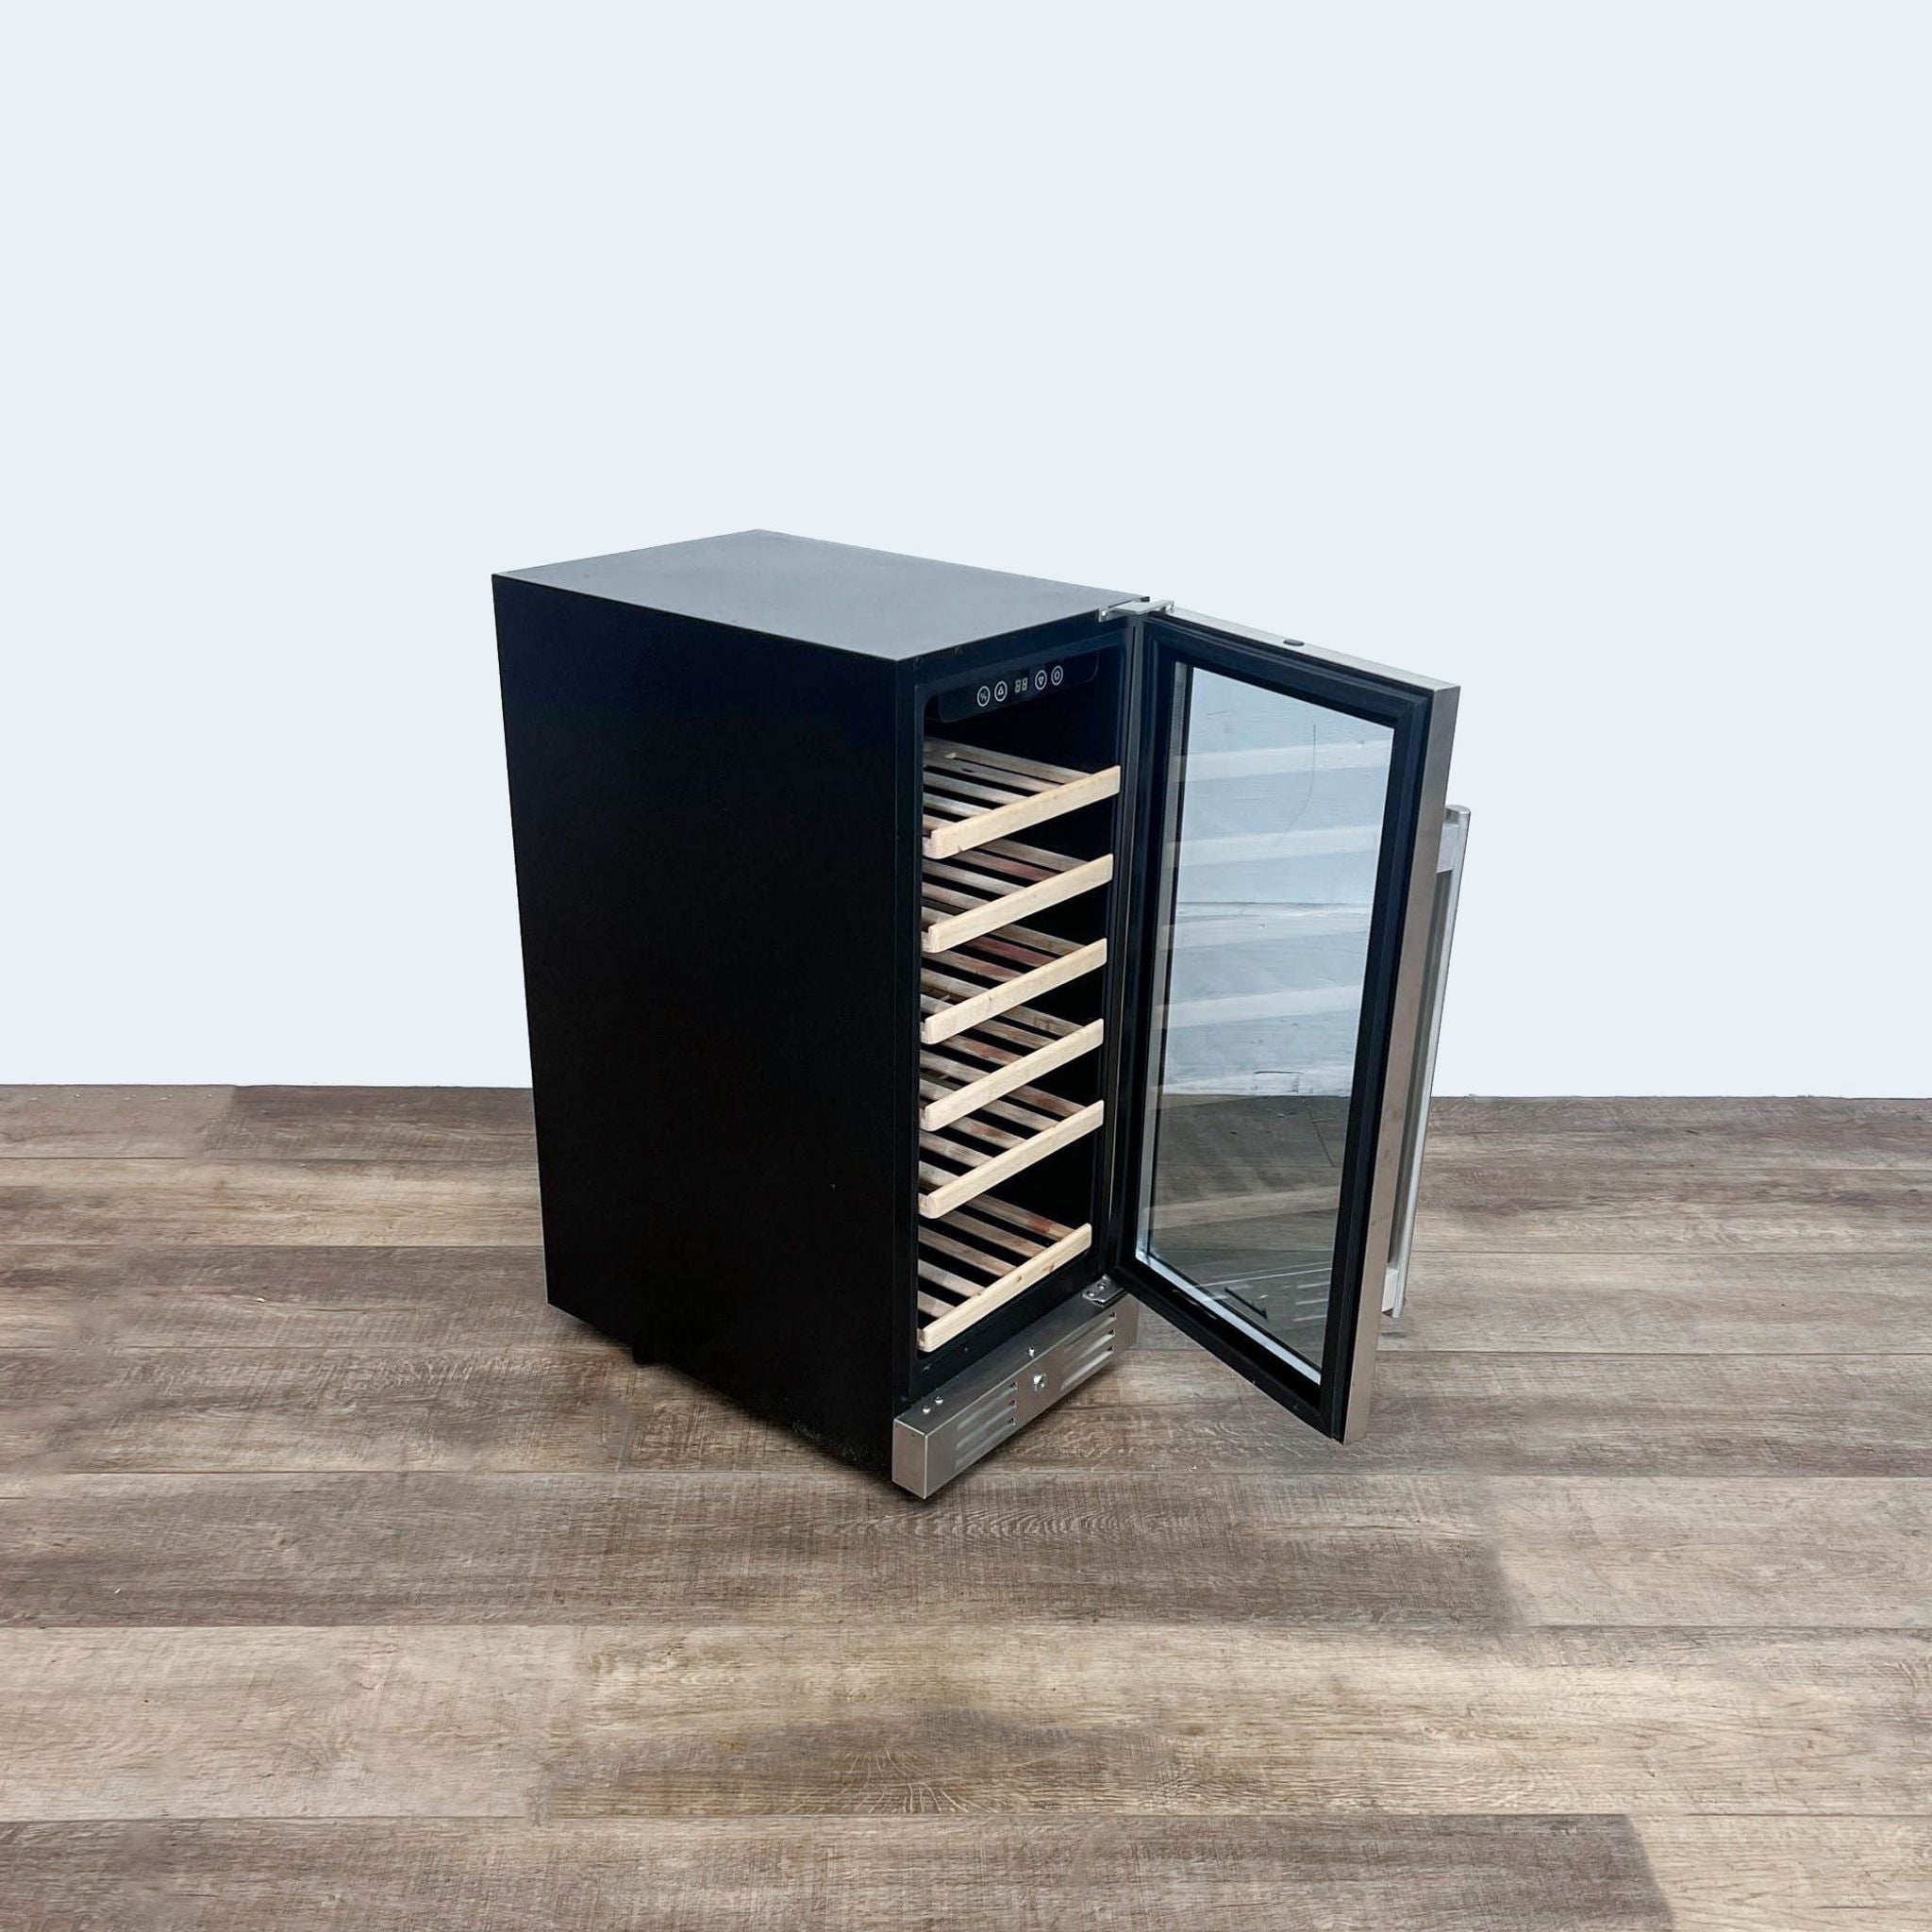 2. Black Kalamera wine cooler with digital temperature display and open glass door revealing wooden shelves, placed on a wooden floor.